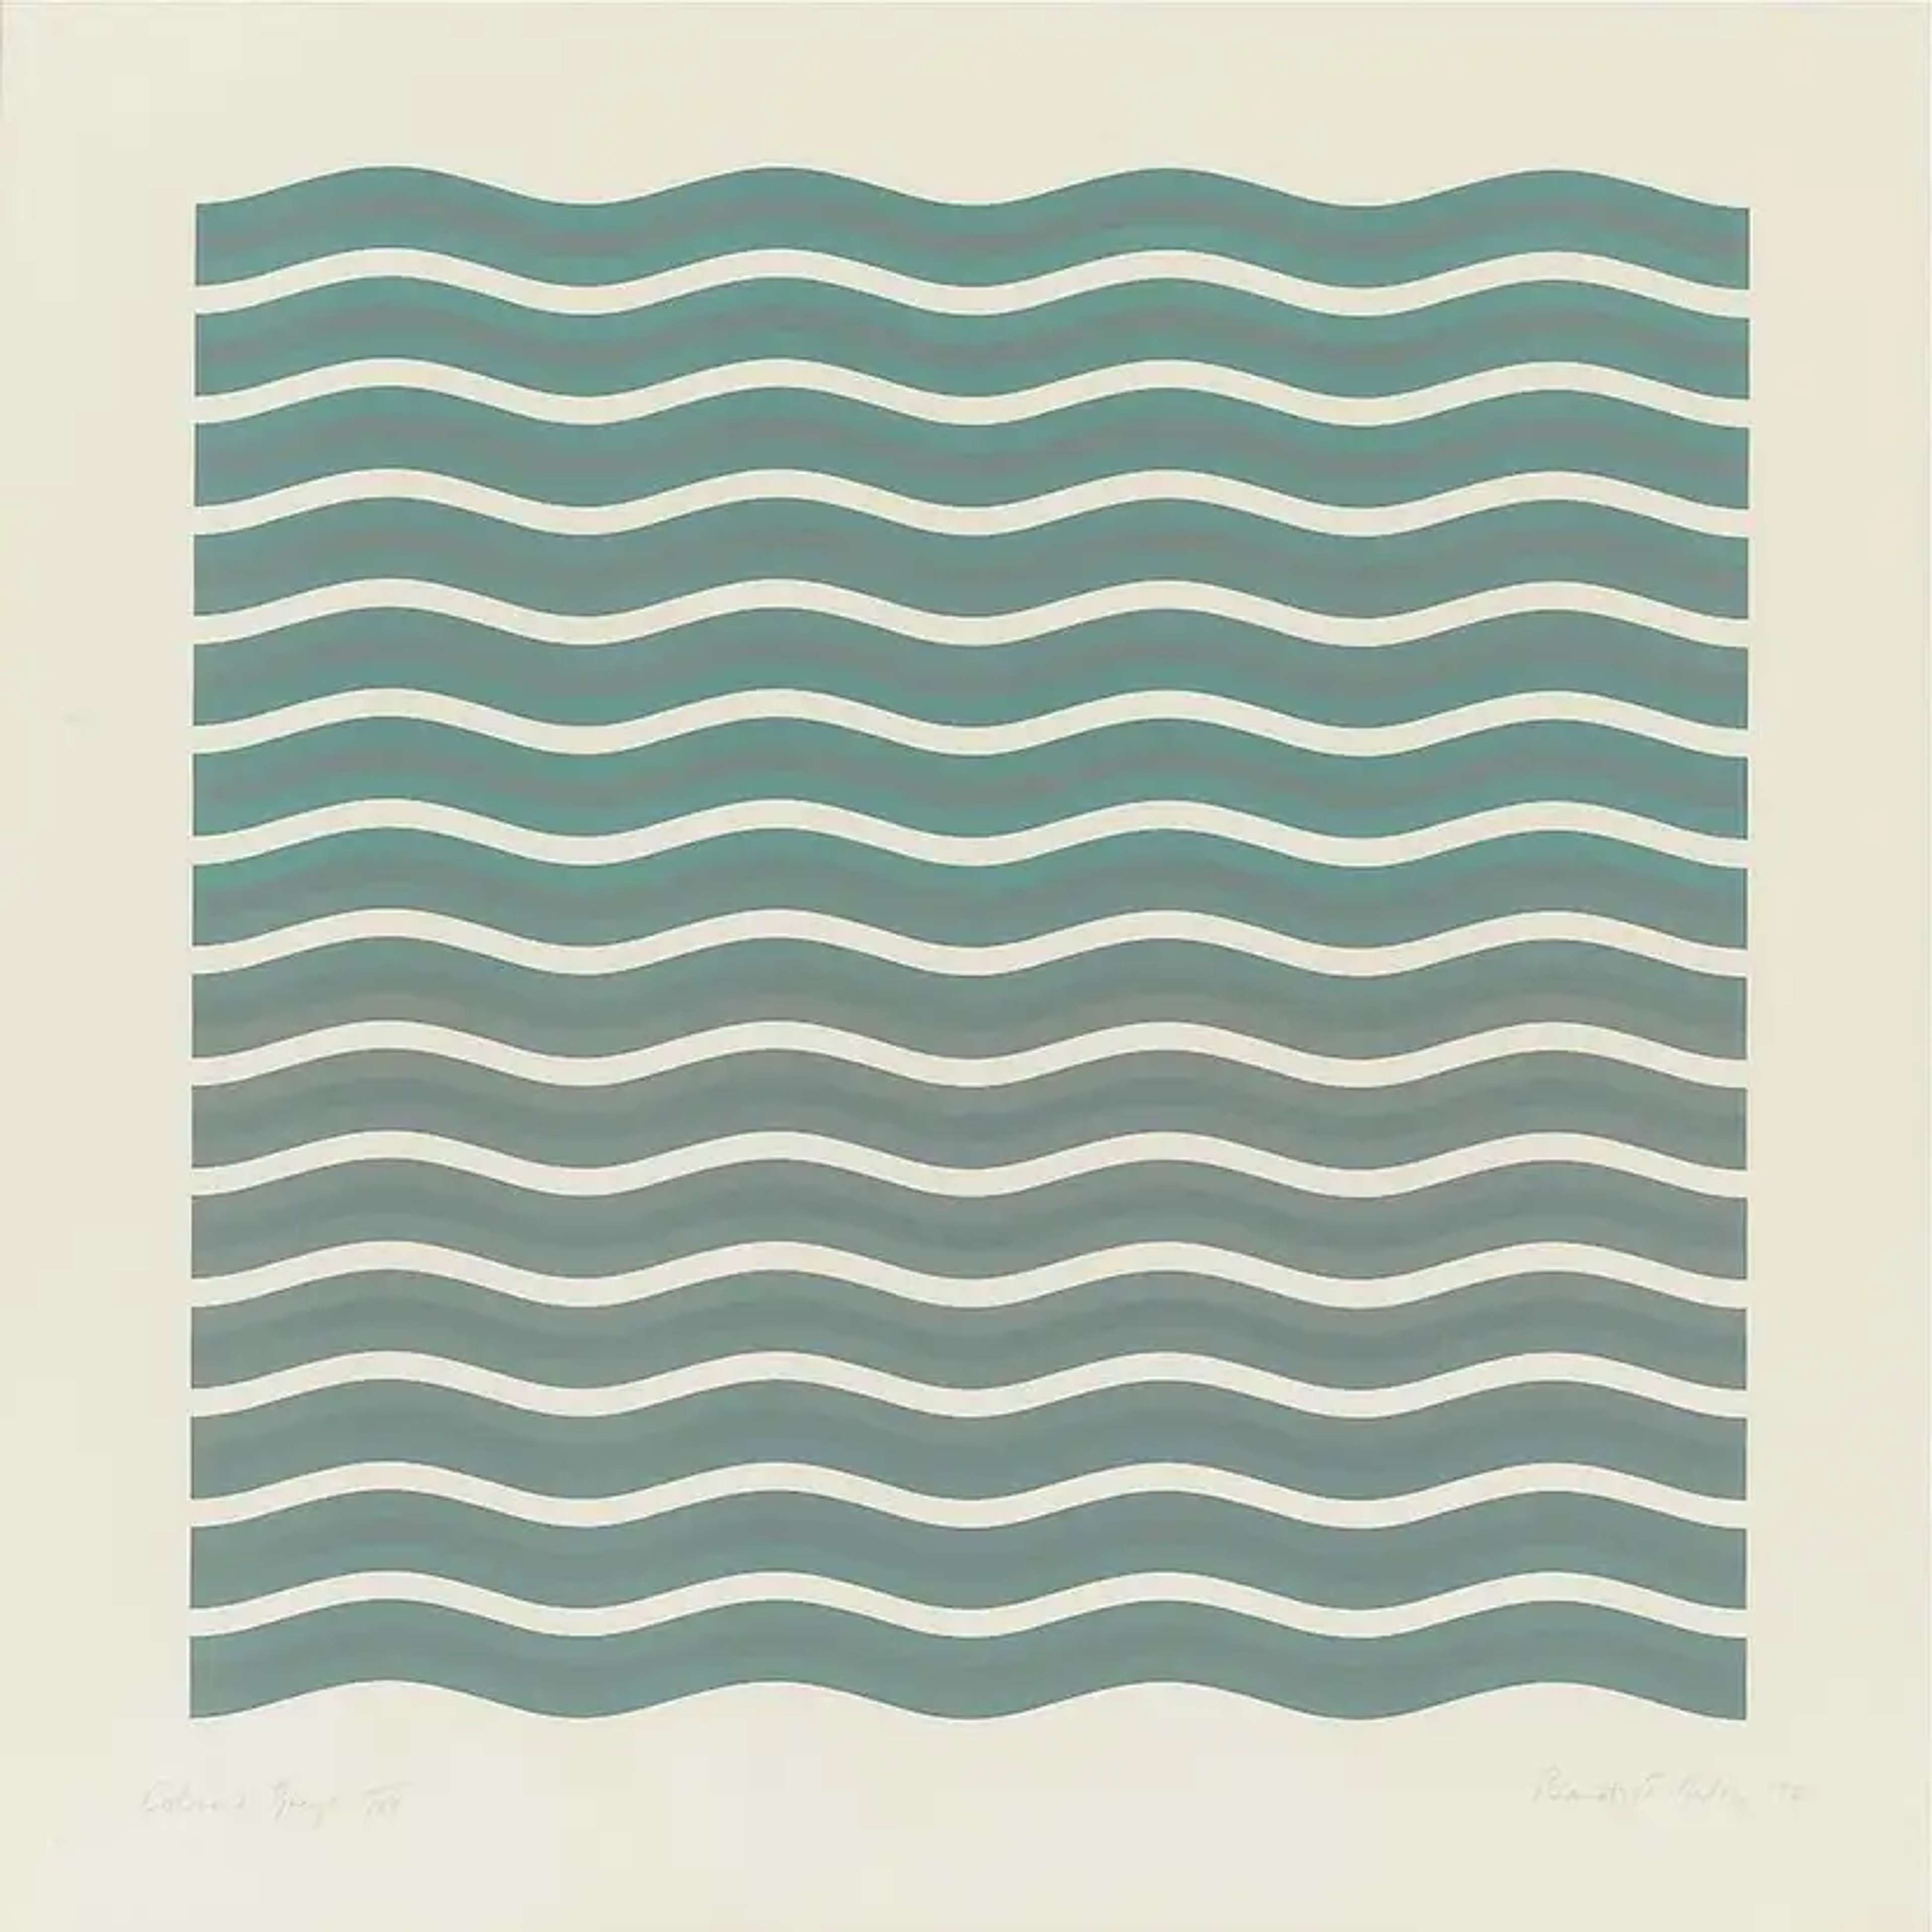 Bridget Riley's Artistic Journey: From Cornwall to Egypt